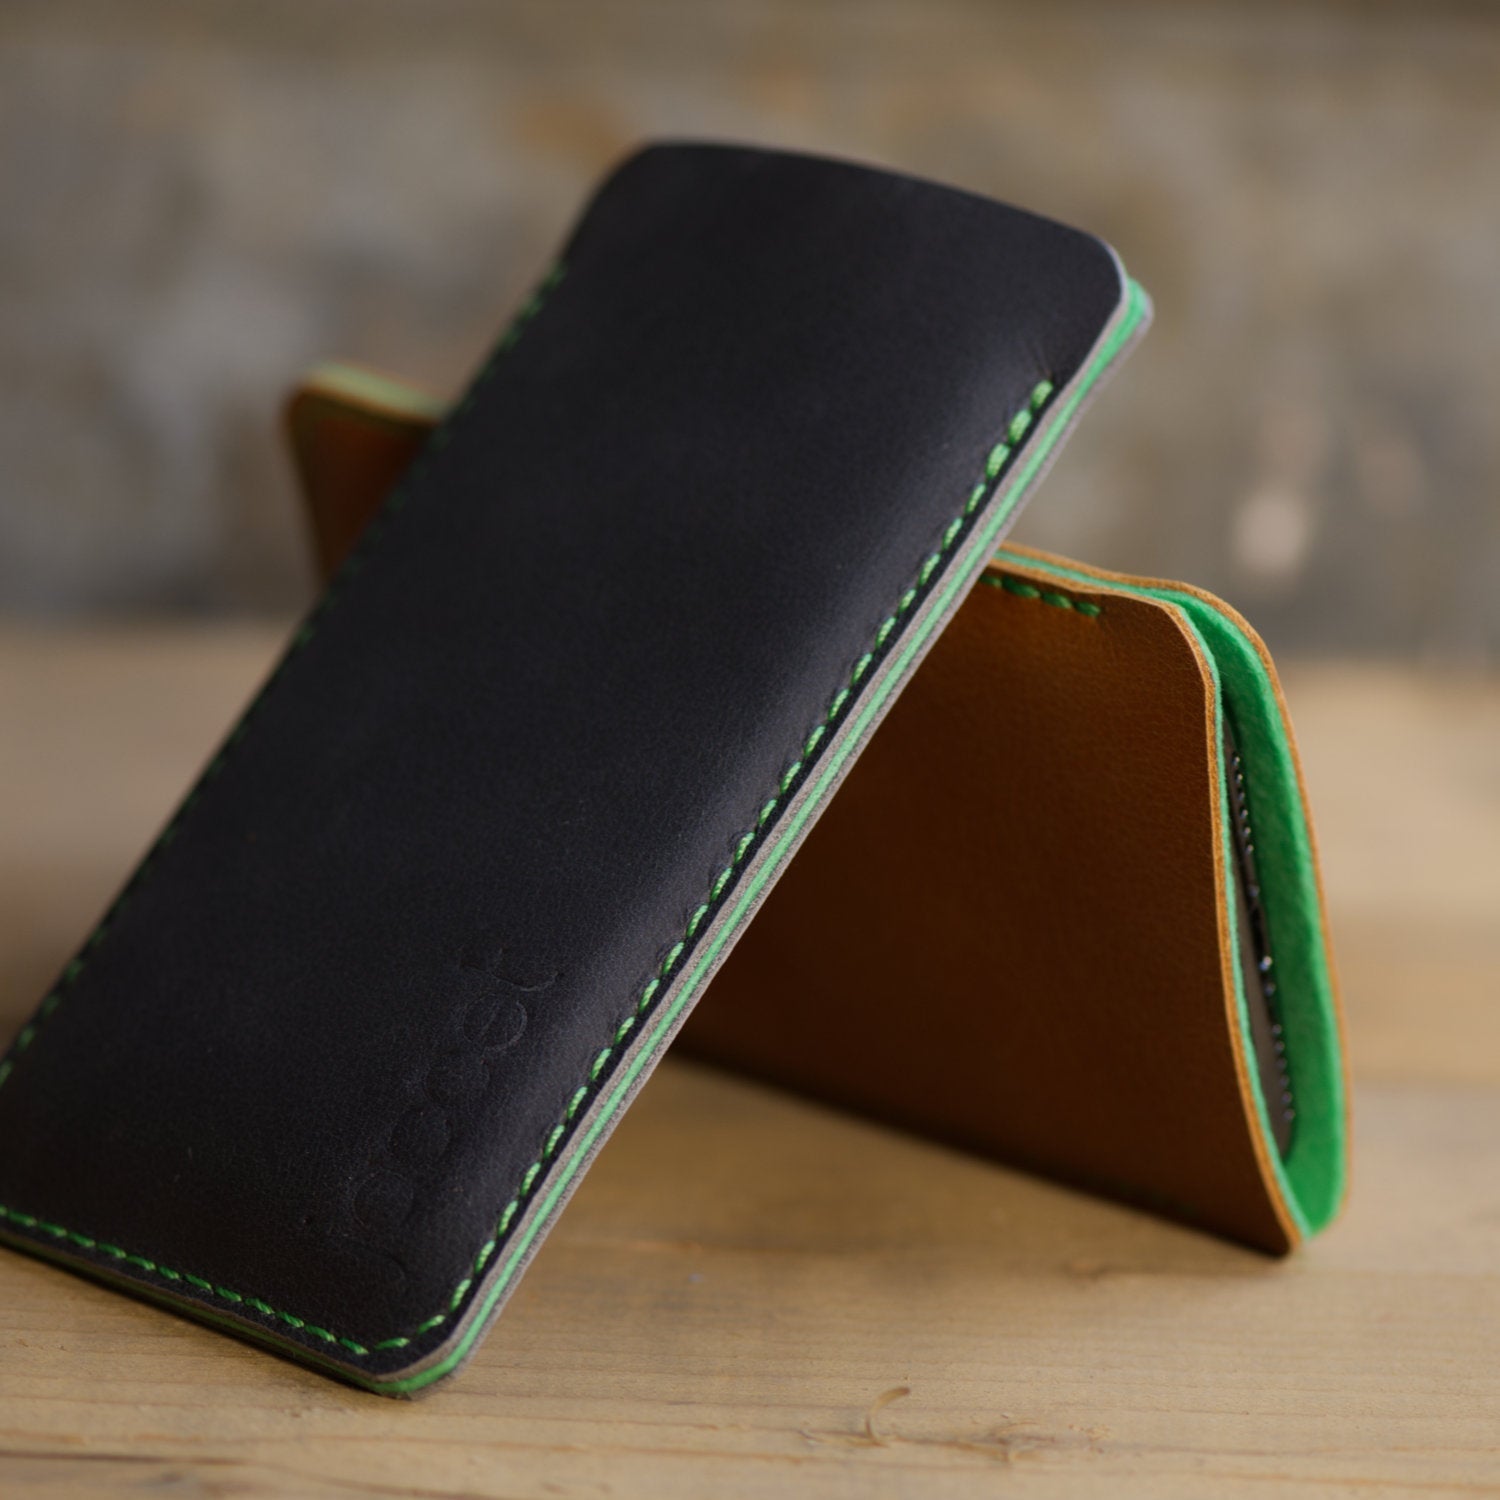 JACCET leather OnePlus sleeve - anthracite/black leather with green wool felt. 100% Handmade